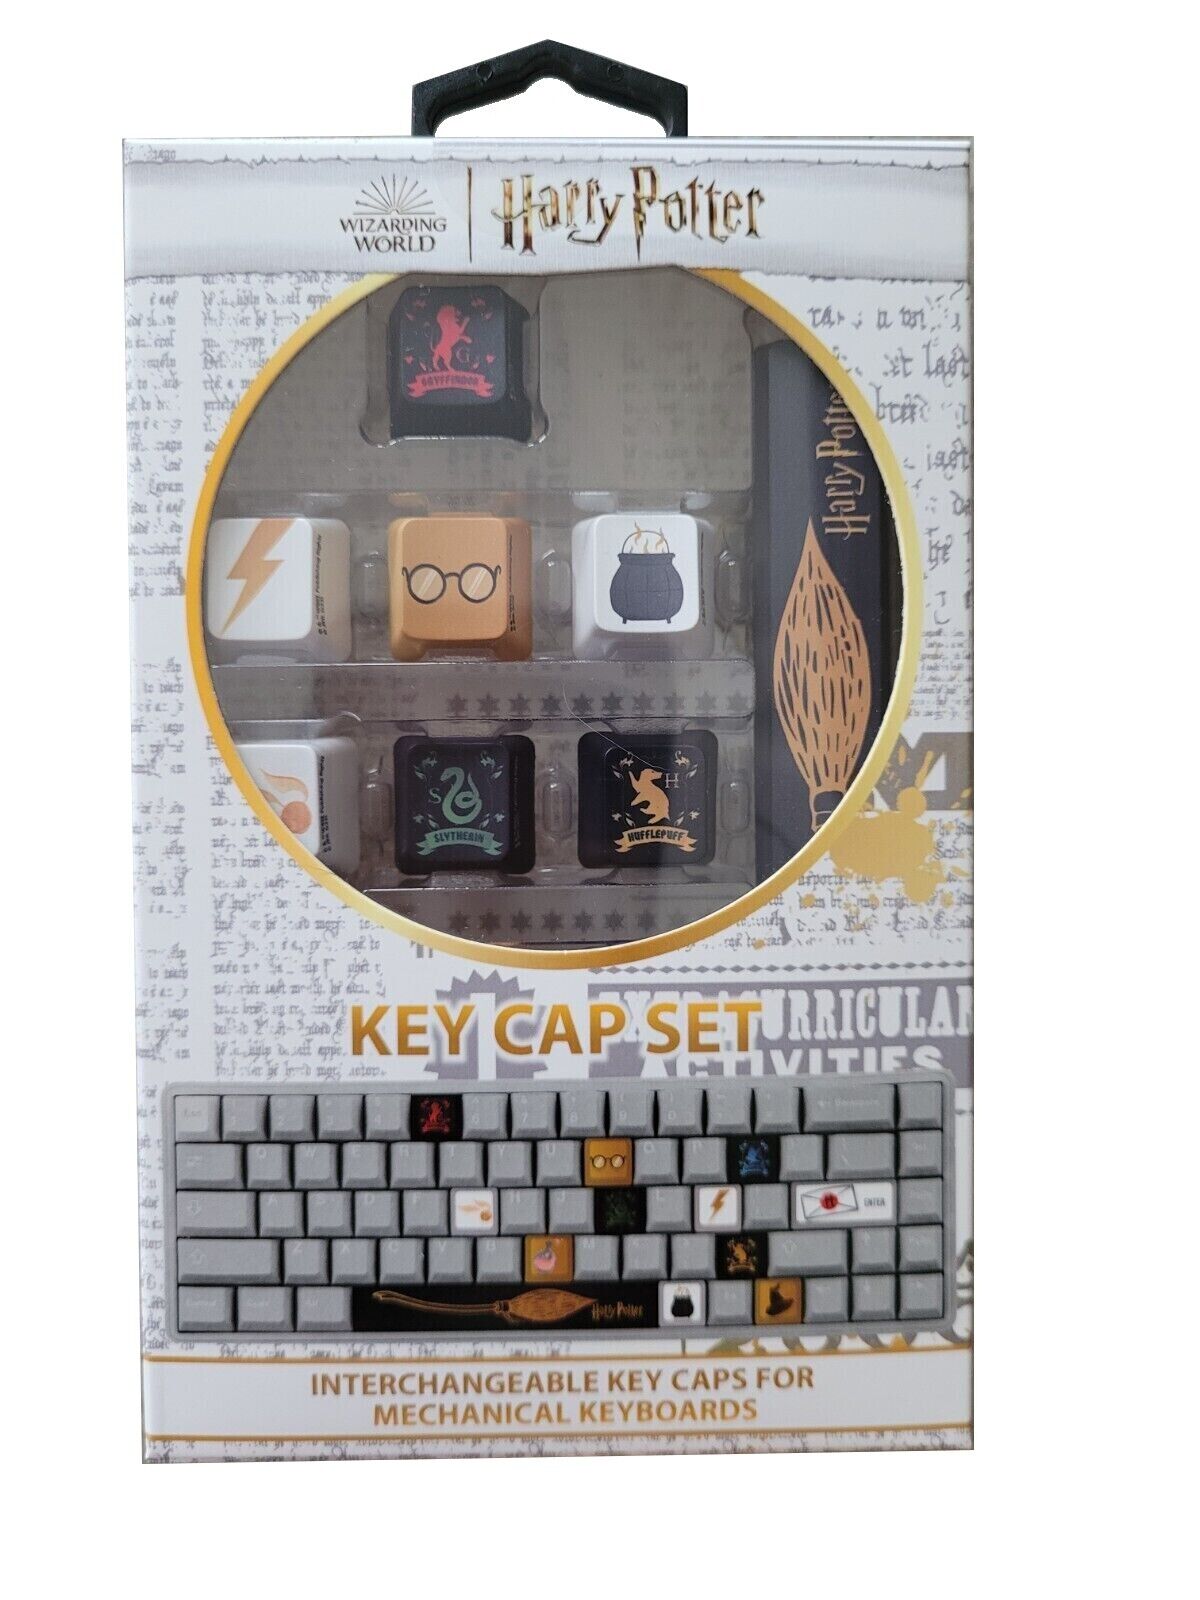 New Edition Harry Potter Keyboard Keycaps For Interchangeable Keyboards